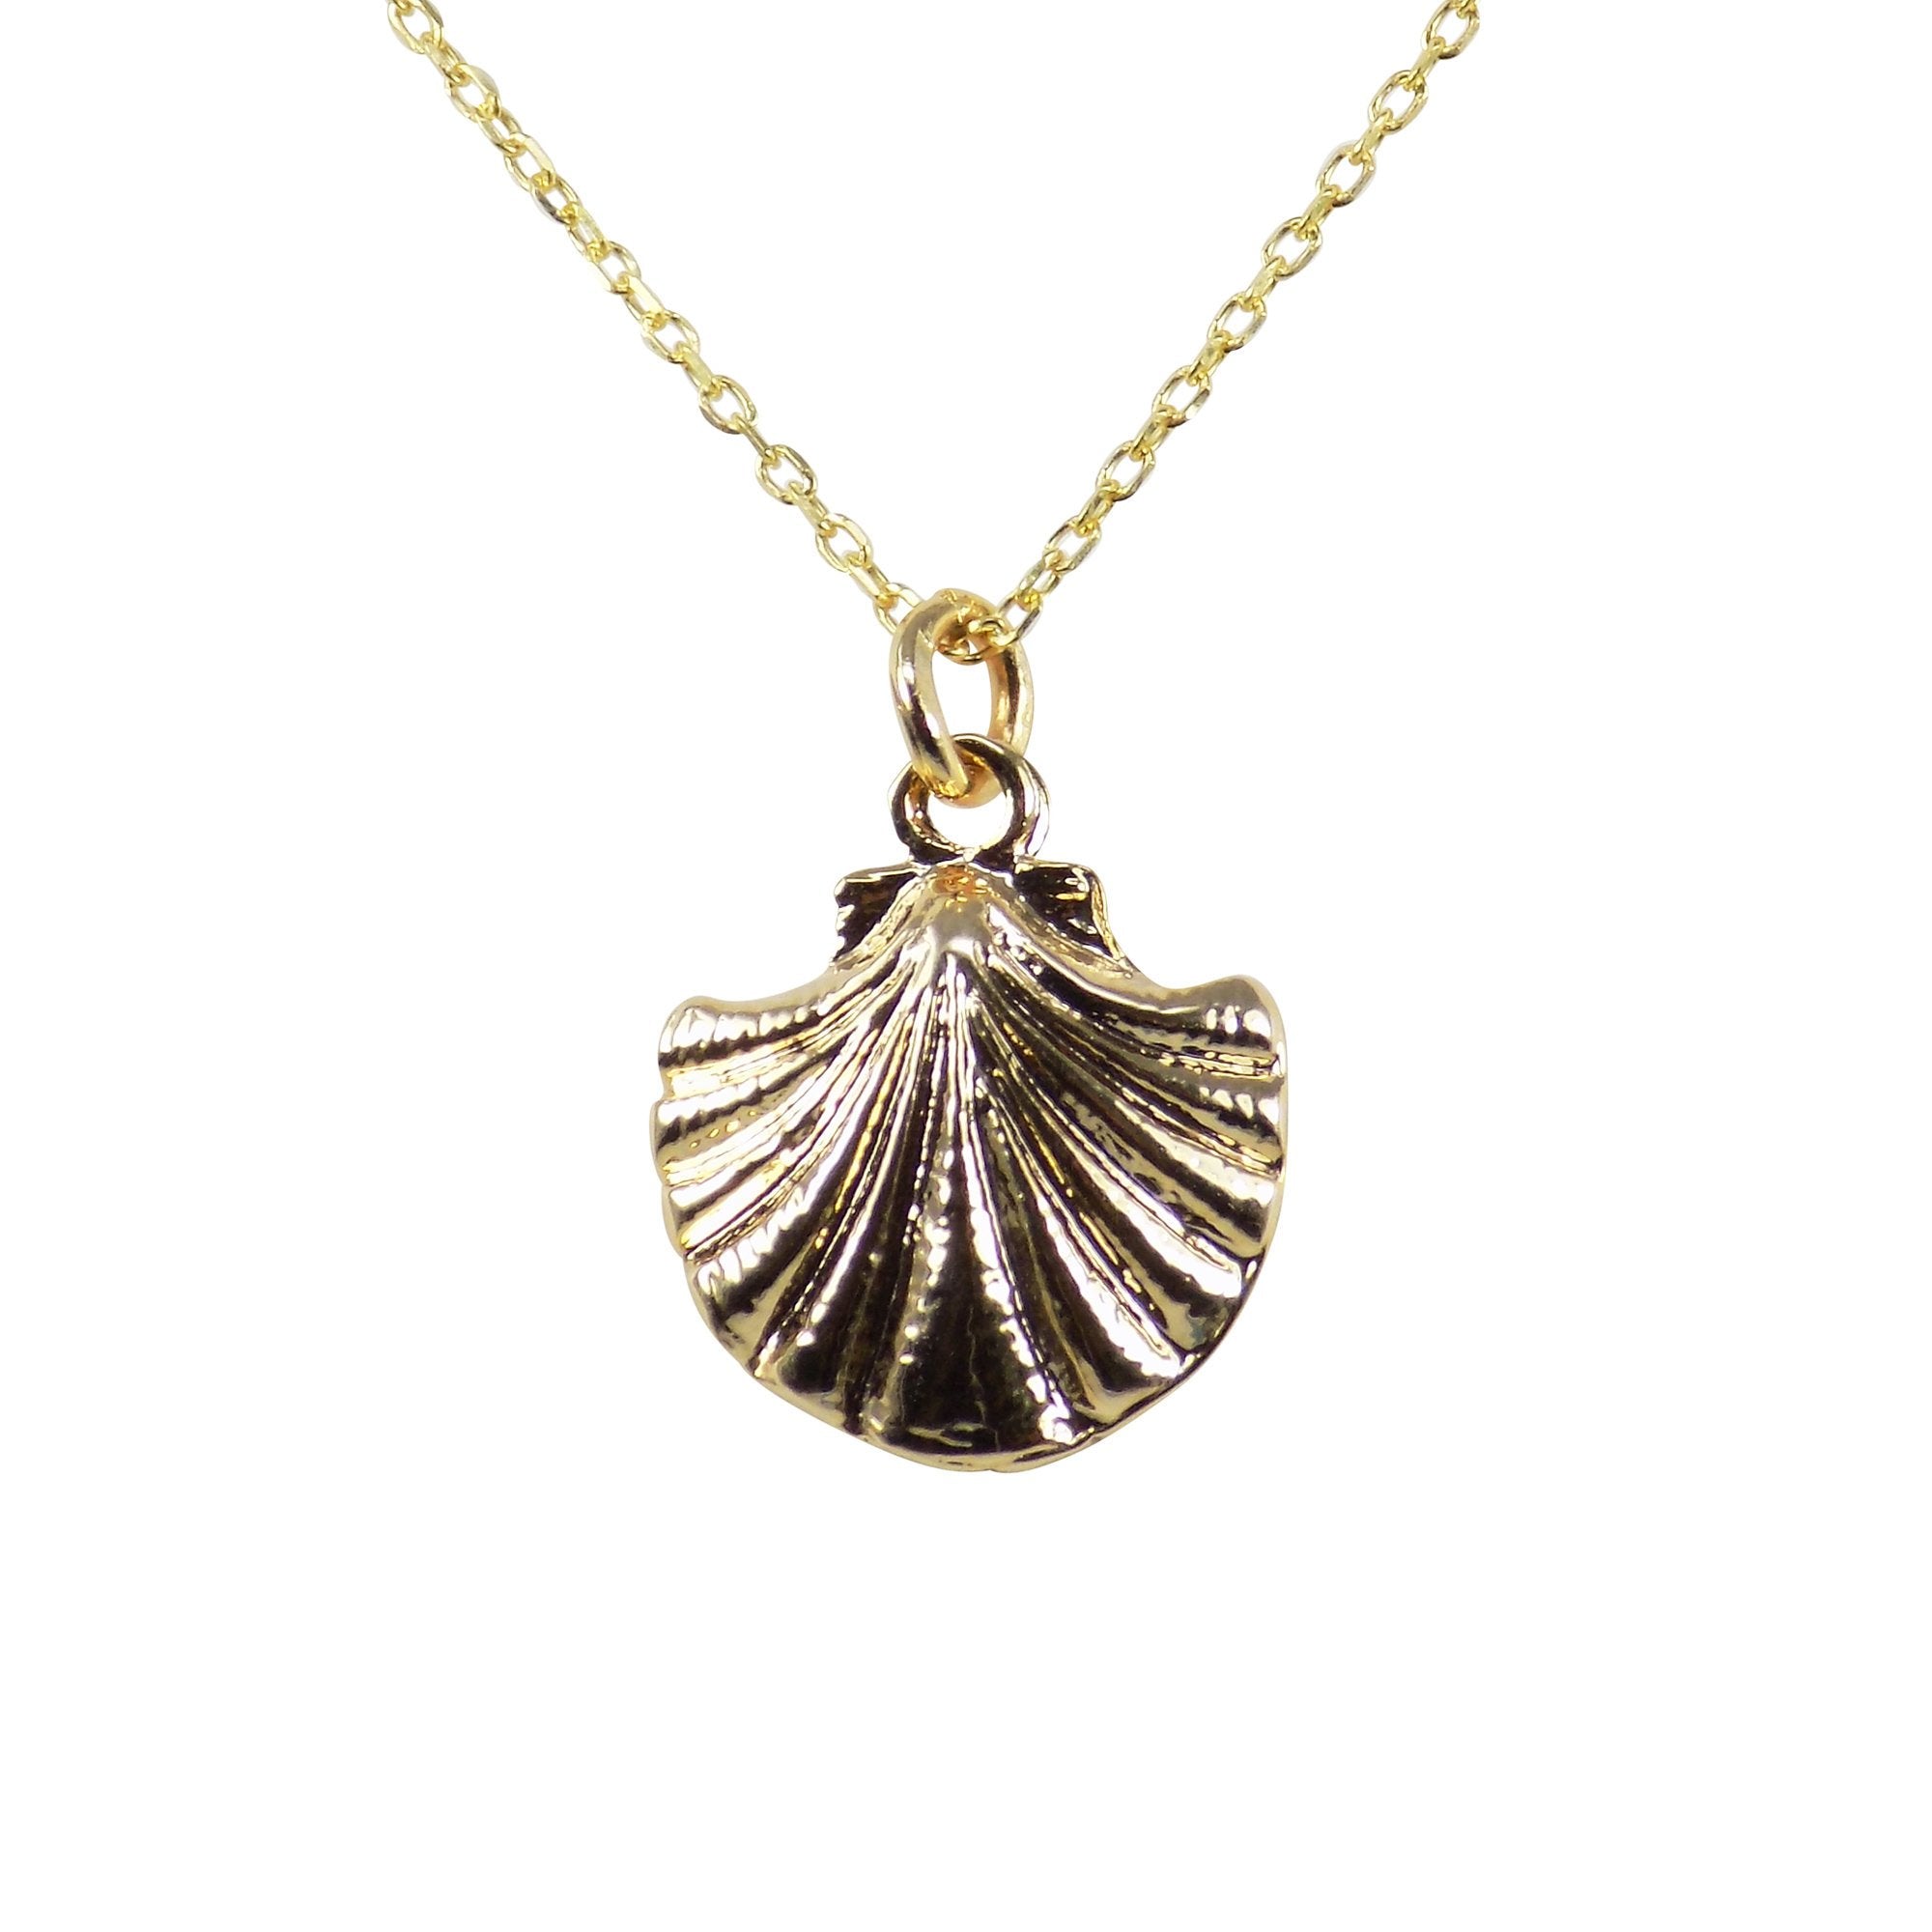 Scallop Charm, Oyster Pendant, Gold Plated 18K, Sea Shell Pendant, Tiny Shell Charm, Summer Charm Sea Pendant Wholesale